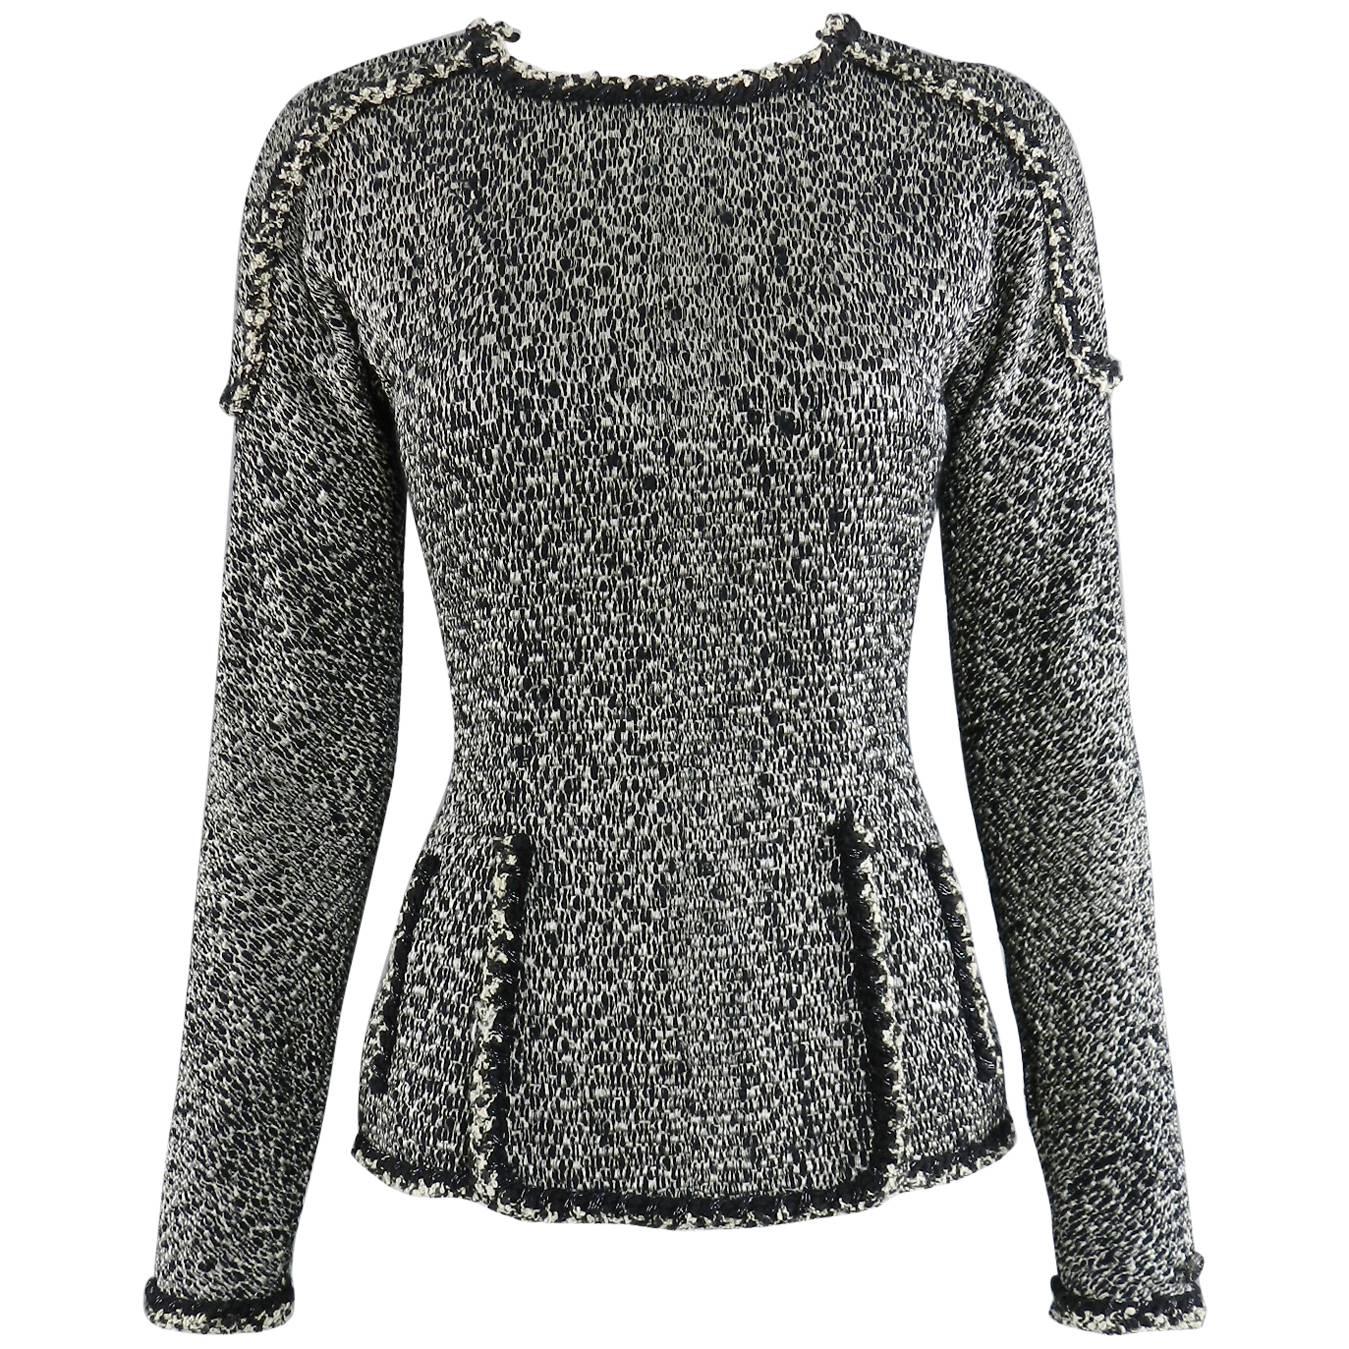 Chanel 11A Black and Ivory Long Sleeve Runway Top